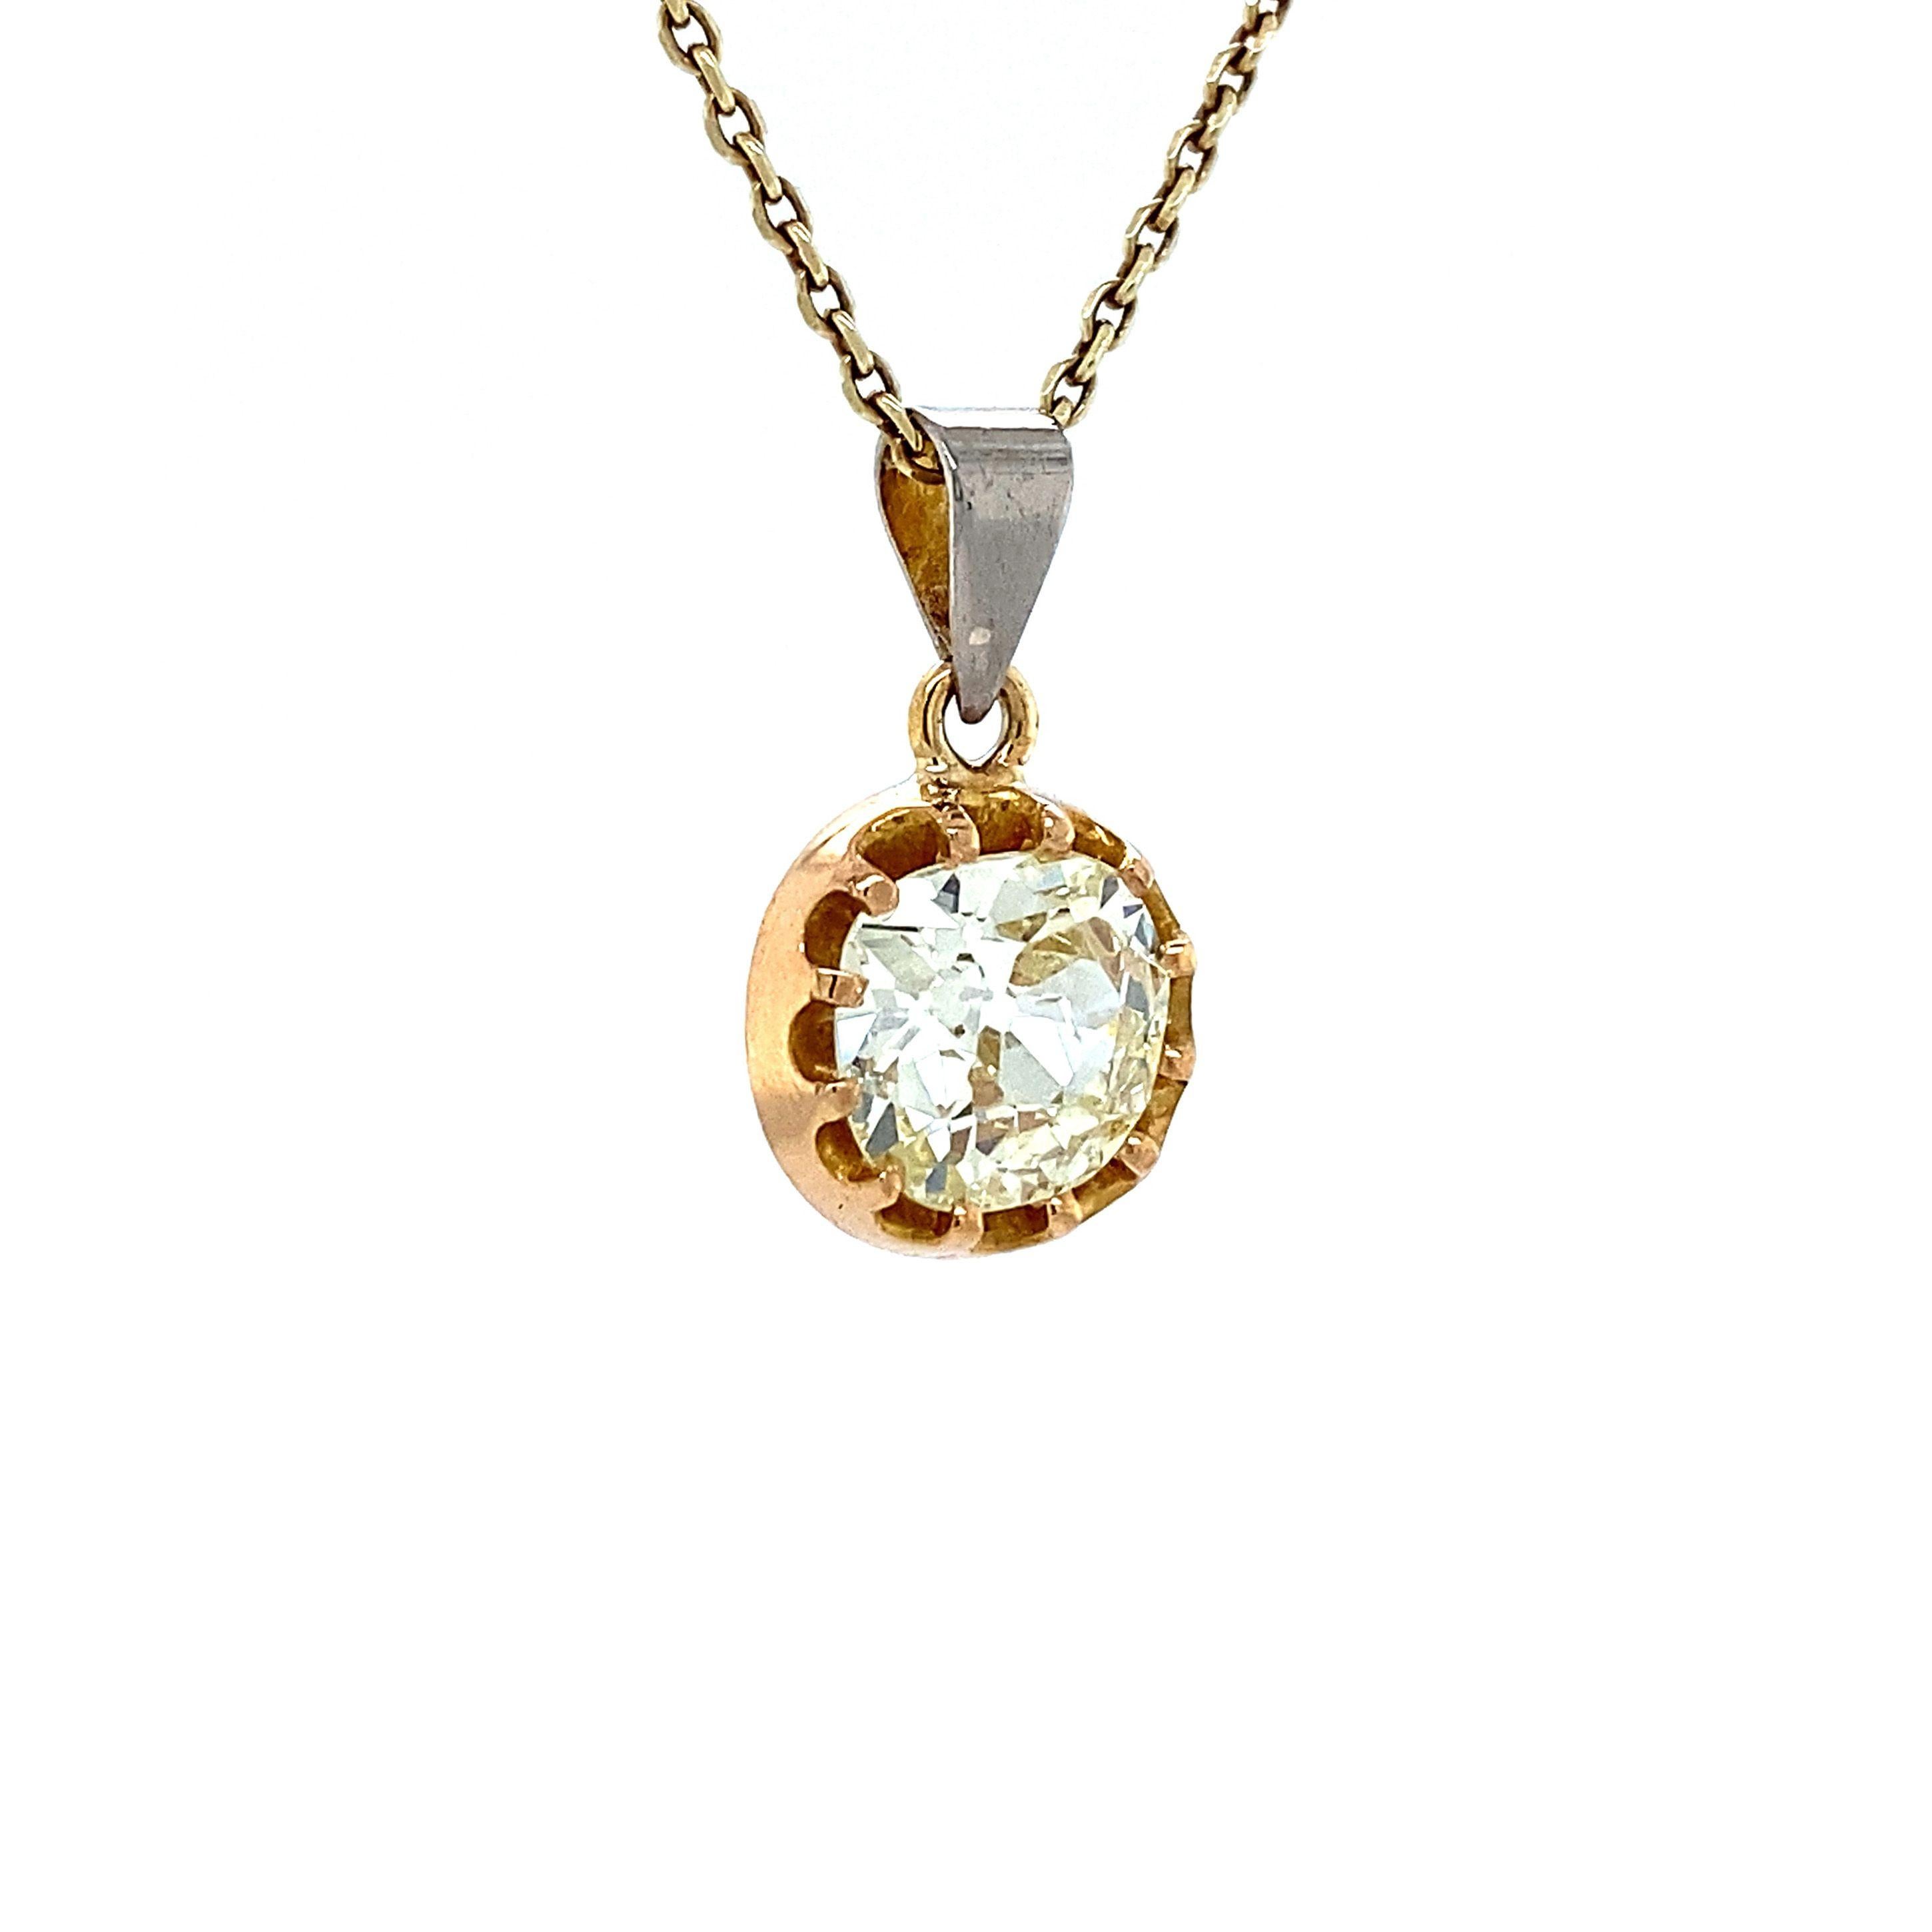 This 18 carat bicolour pendant is set with an 1.97 carat  old european cut diamond, set in a 12 prong chaton setting. The pendant loop is 18 carat white gold. 

Material: Bicolour gold (yellow/white)
Grade: 18 carat
Stone type: Diamond 1.97